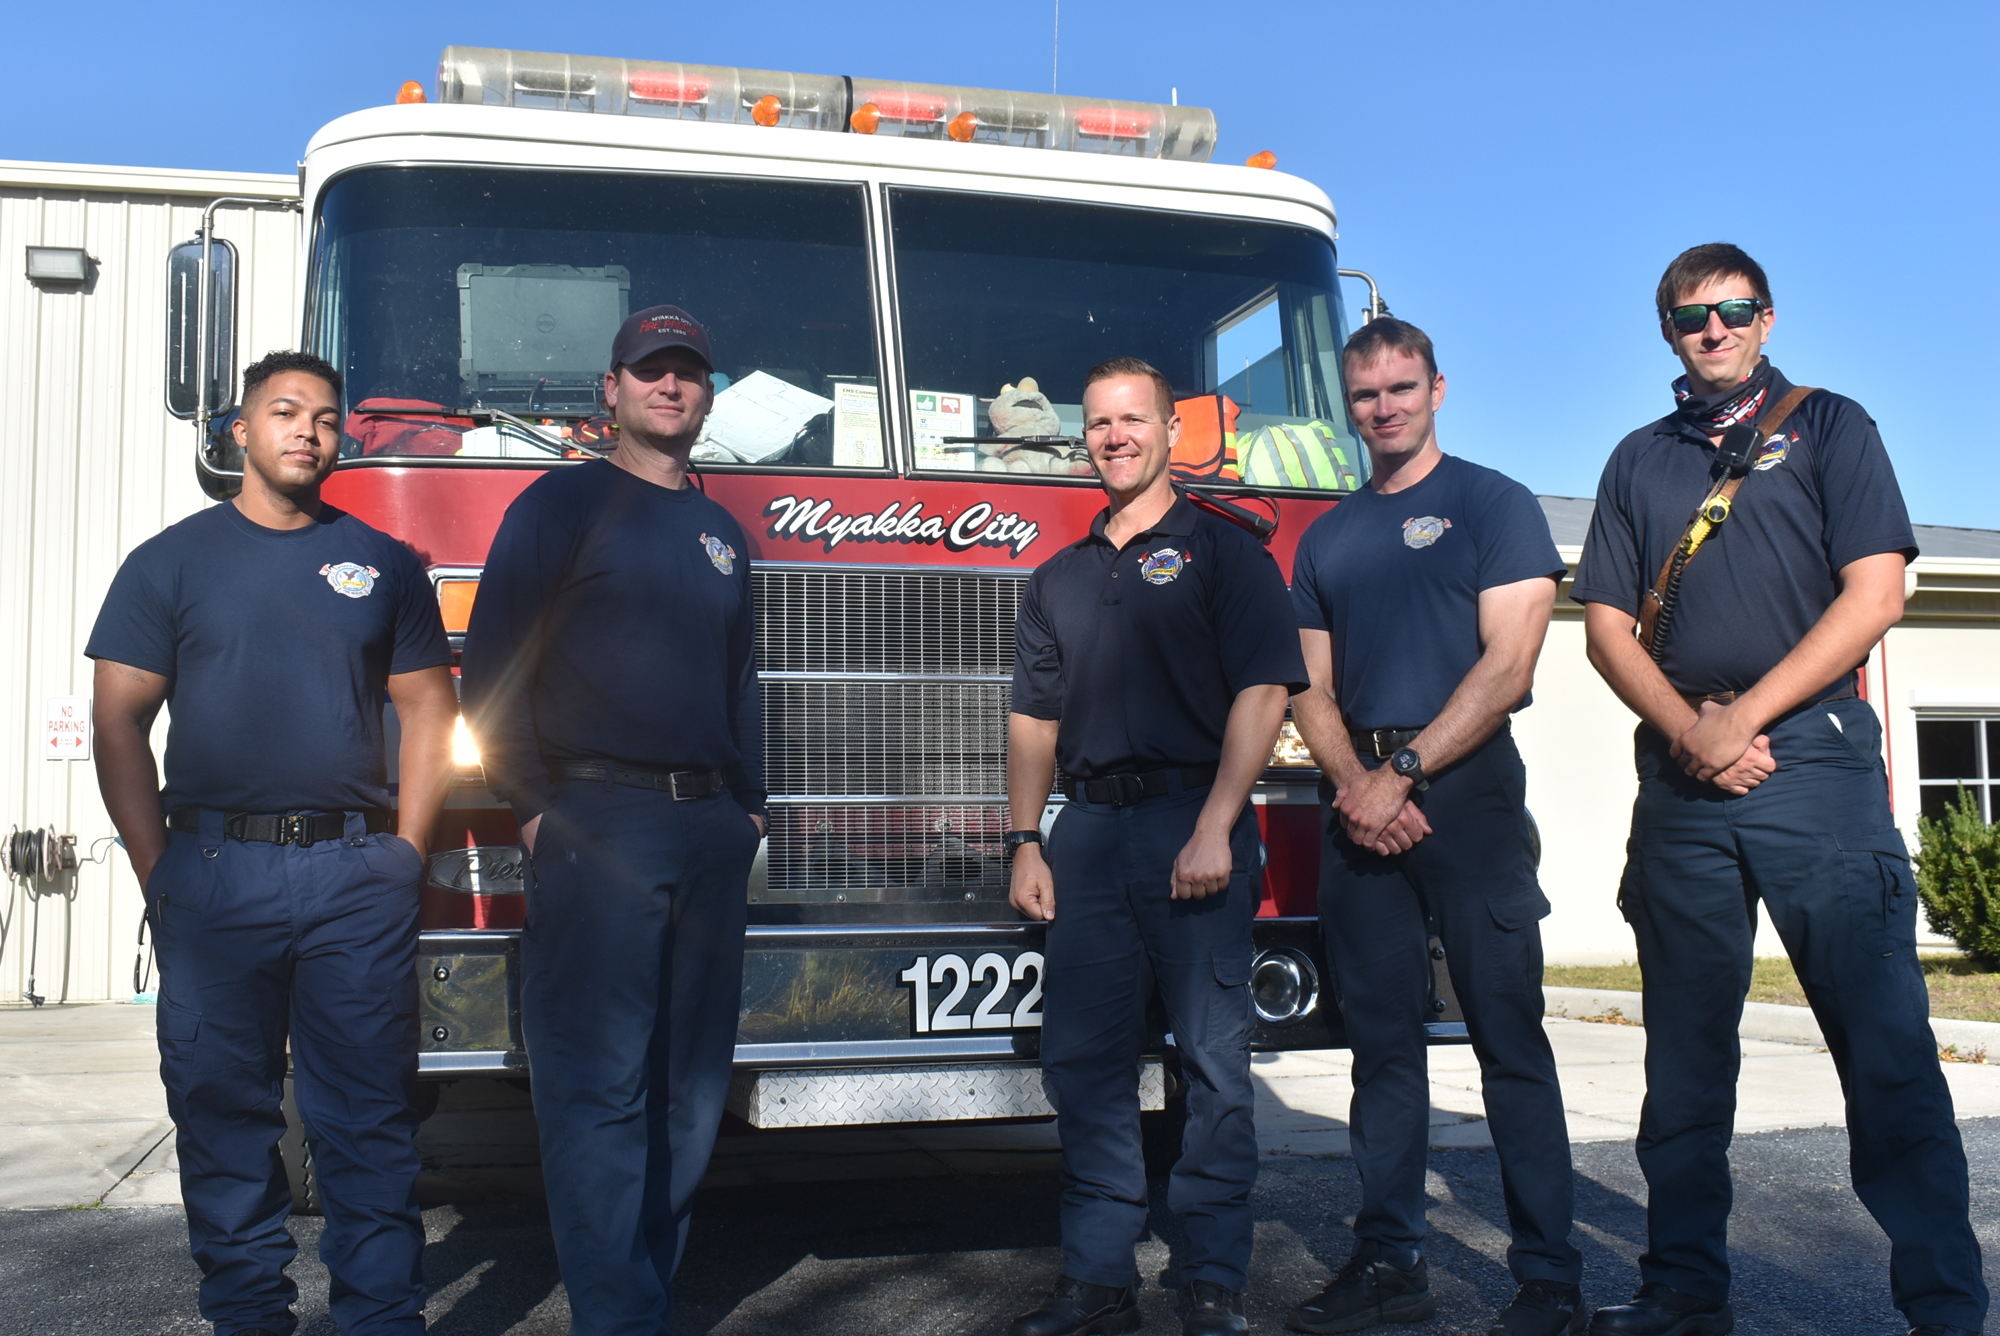 Robert Turner, Ben Guth, Trevor Garofalo, Ray Sullivan and J.T. Bacigalupi are Myakka City Fire Control District firefighters. Guth, Garofalo and Sullivan are leading the effort to introduce East Manatee firefighters to the area.